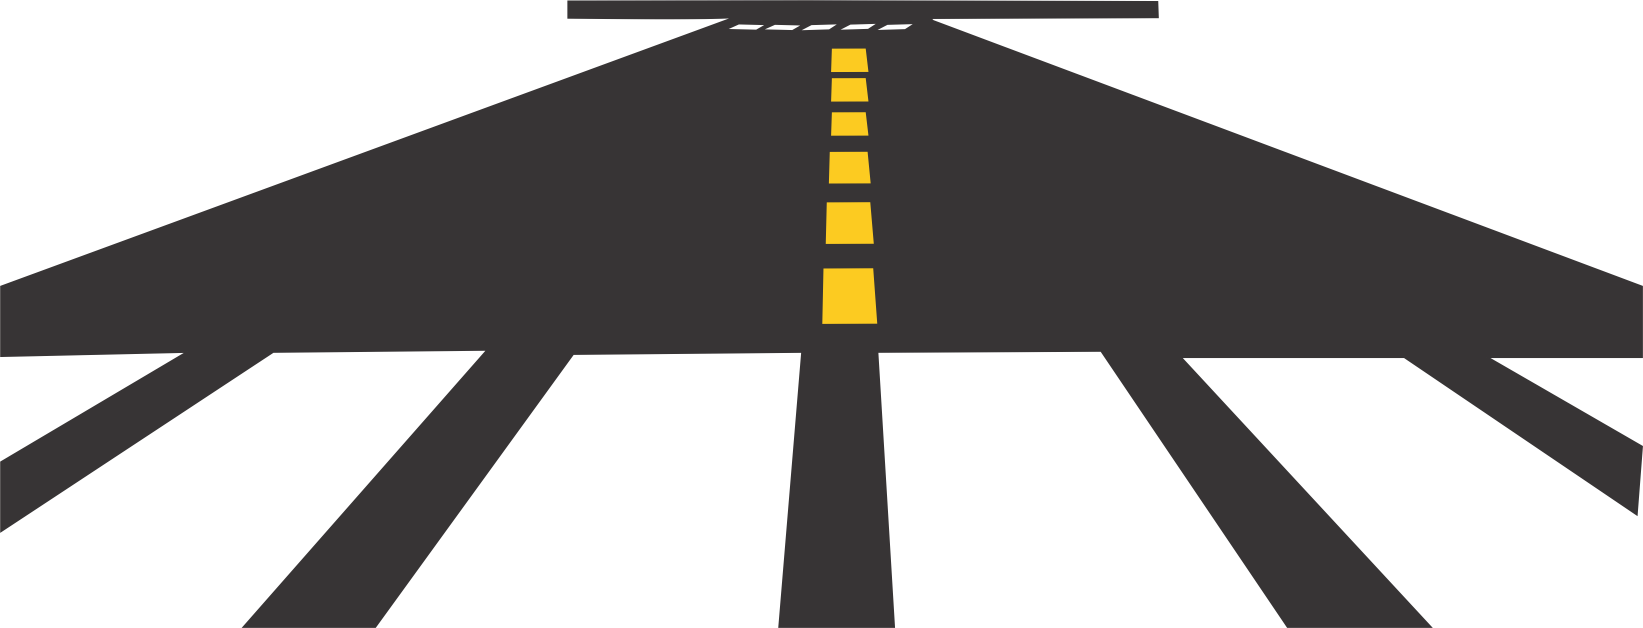 High way png image. Clipart road infrastructure